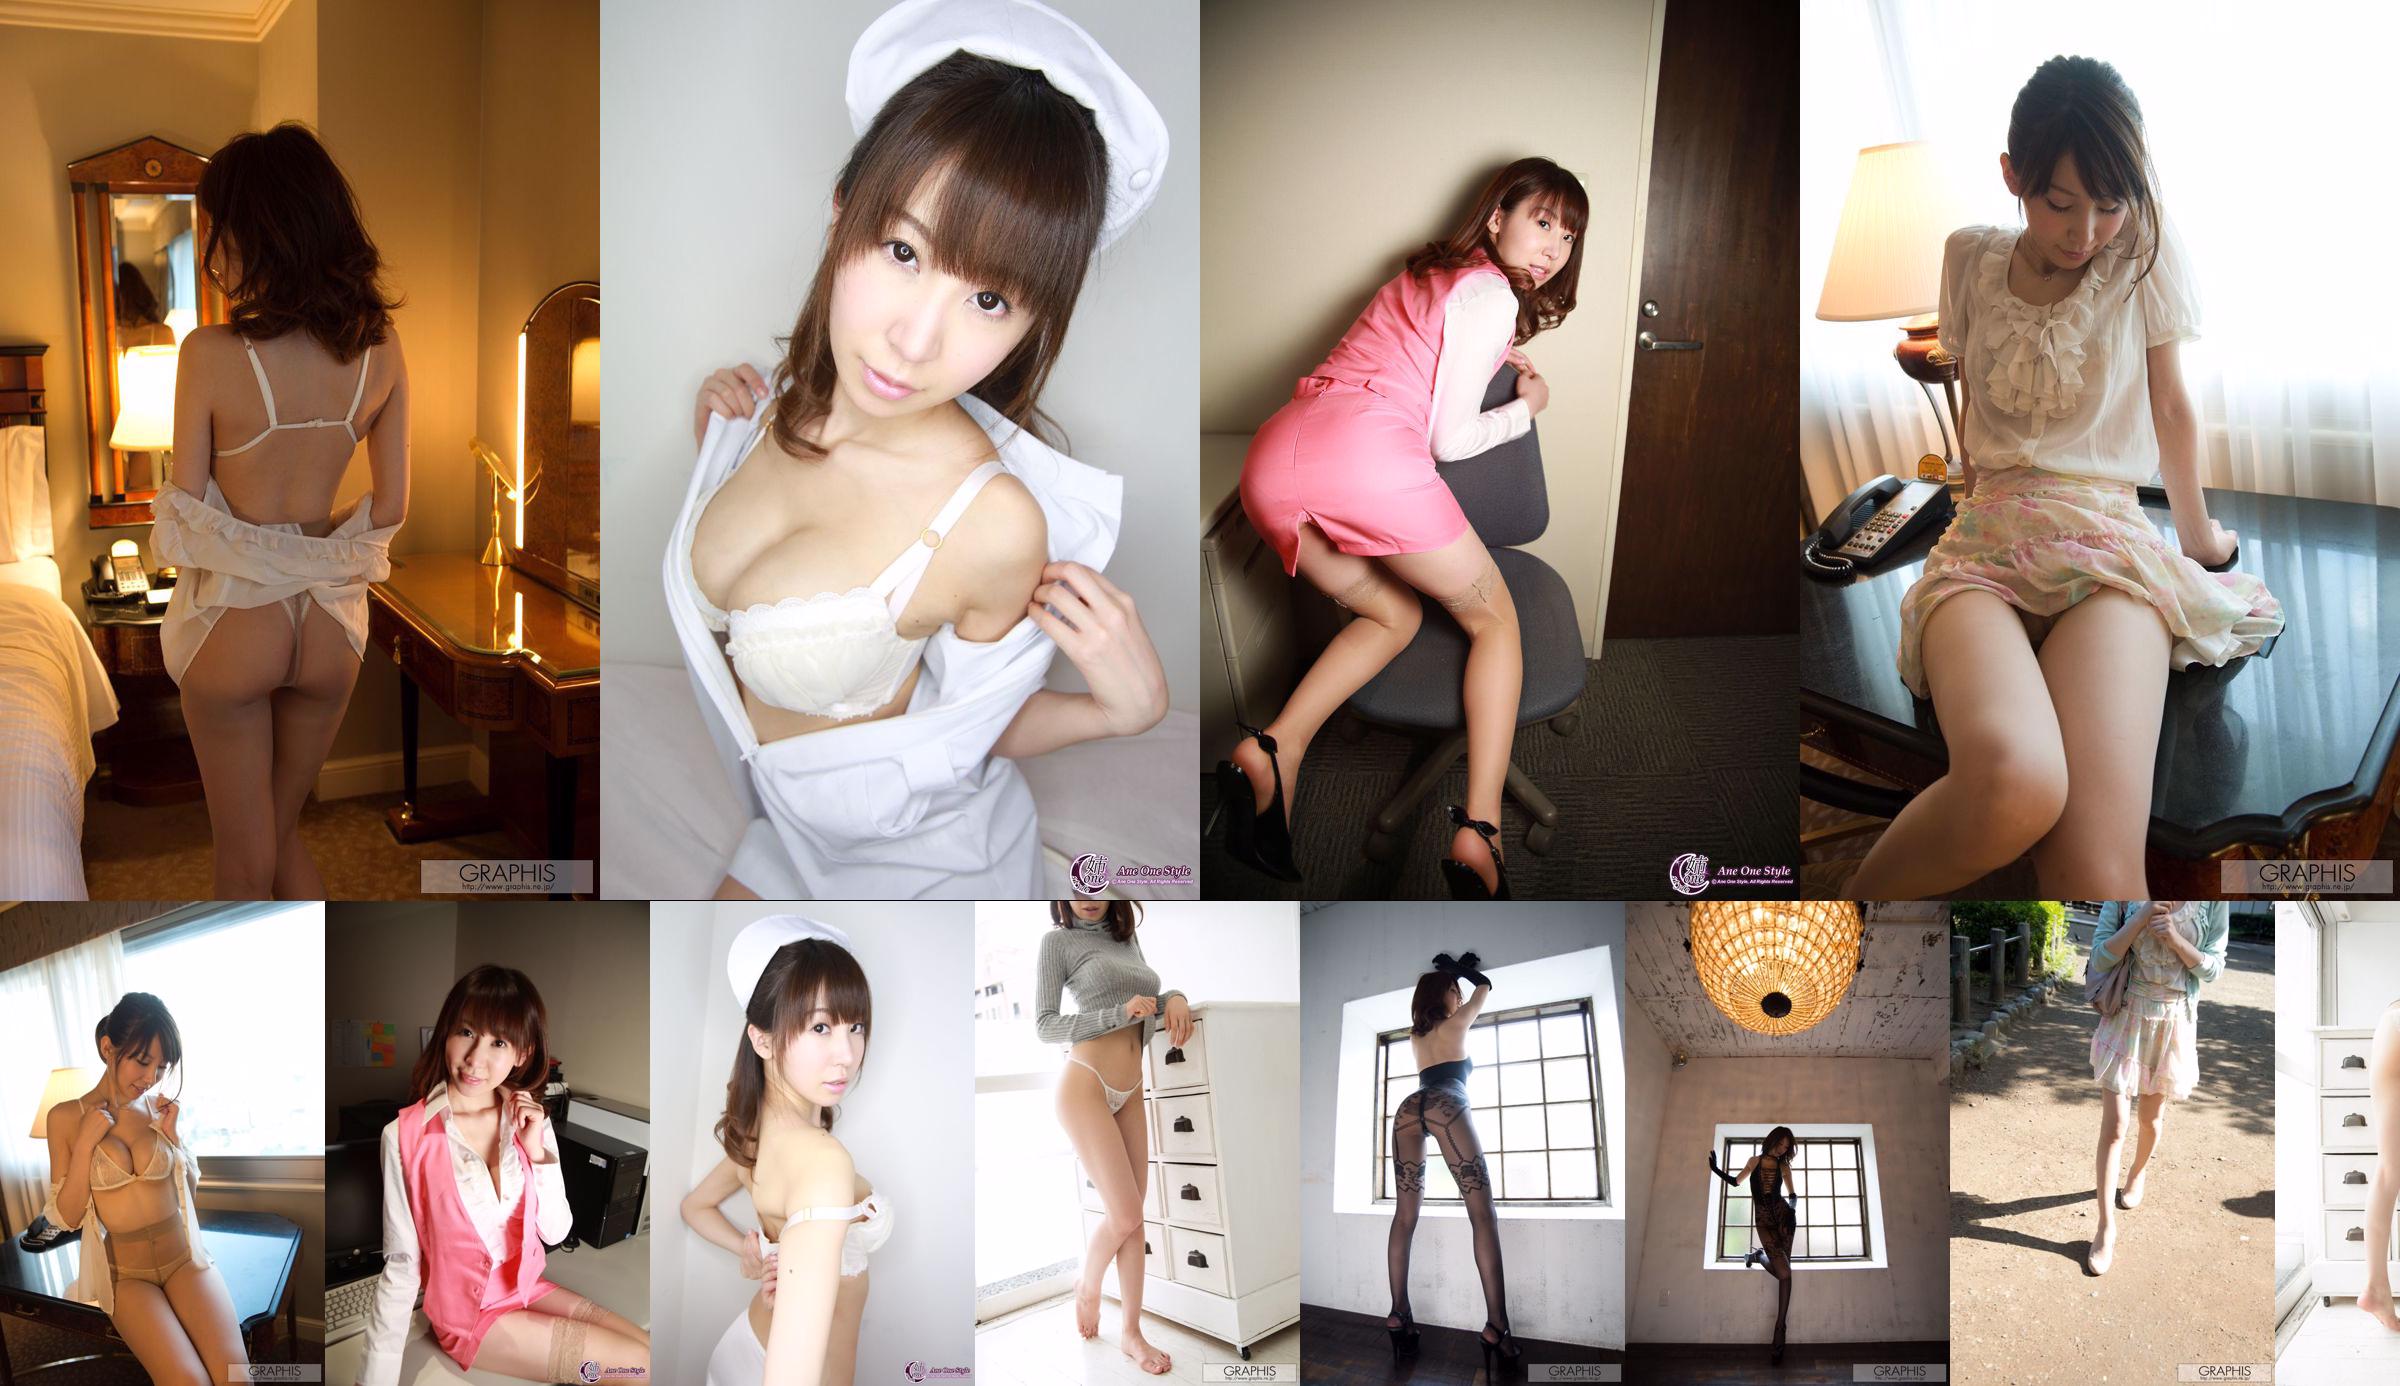 Chibana Meisa / Chibana Meisa [Graphis] First Gravure First take off daughter No.ba58e5 Page 3